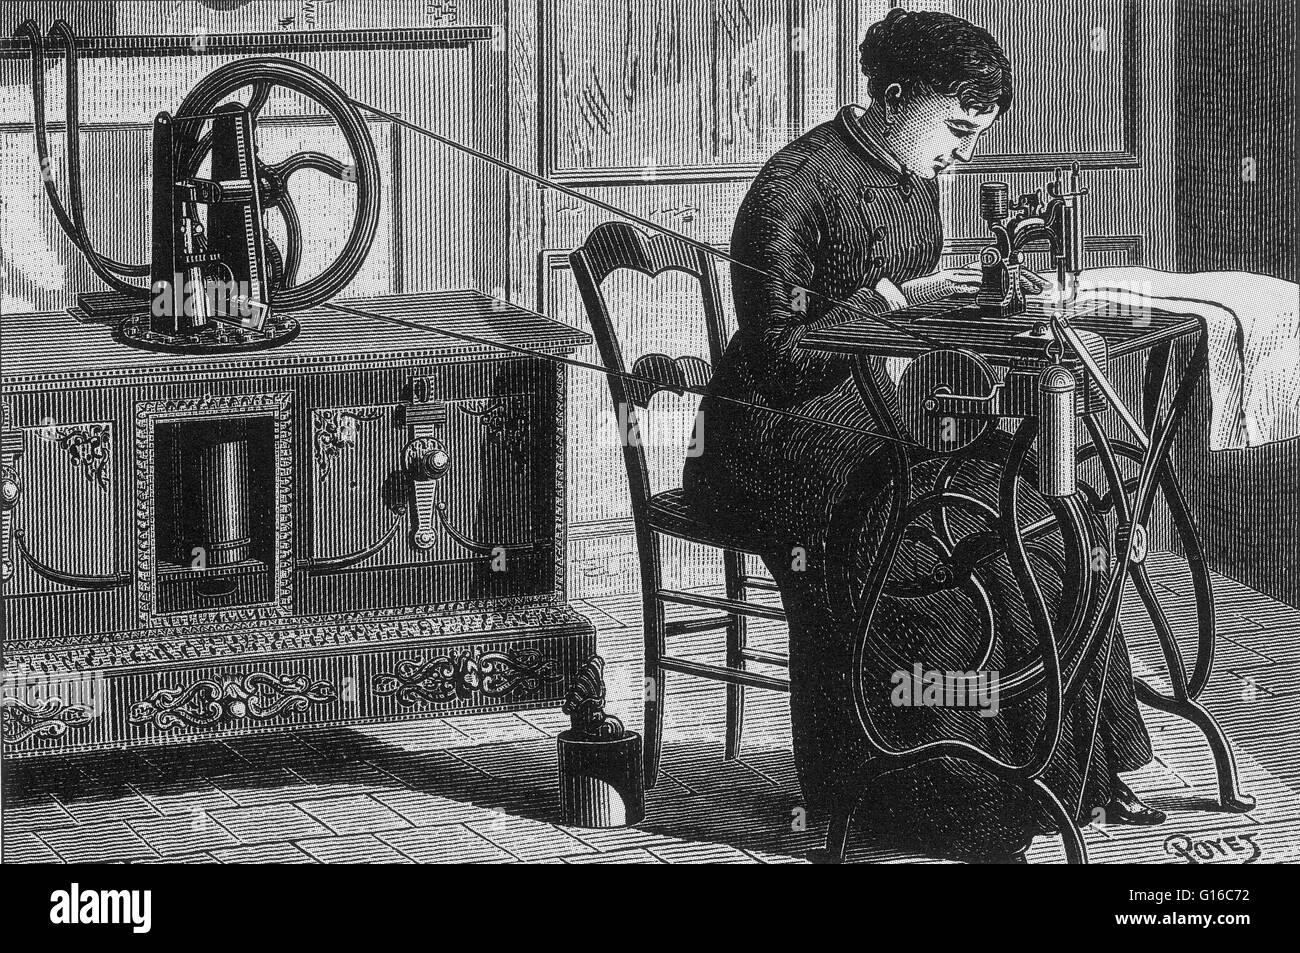 Undated engraving by Louis Poyet depicting a steam-powered sewing machine. A sewing machine is a machine used to stitch fabric and other materials together with thread. Sewing machines were invented during the first Industrial Revolution to decrease the a Stock Photo